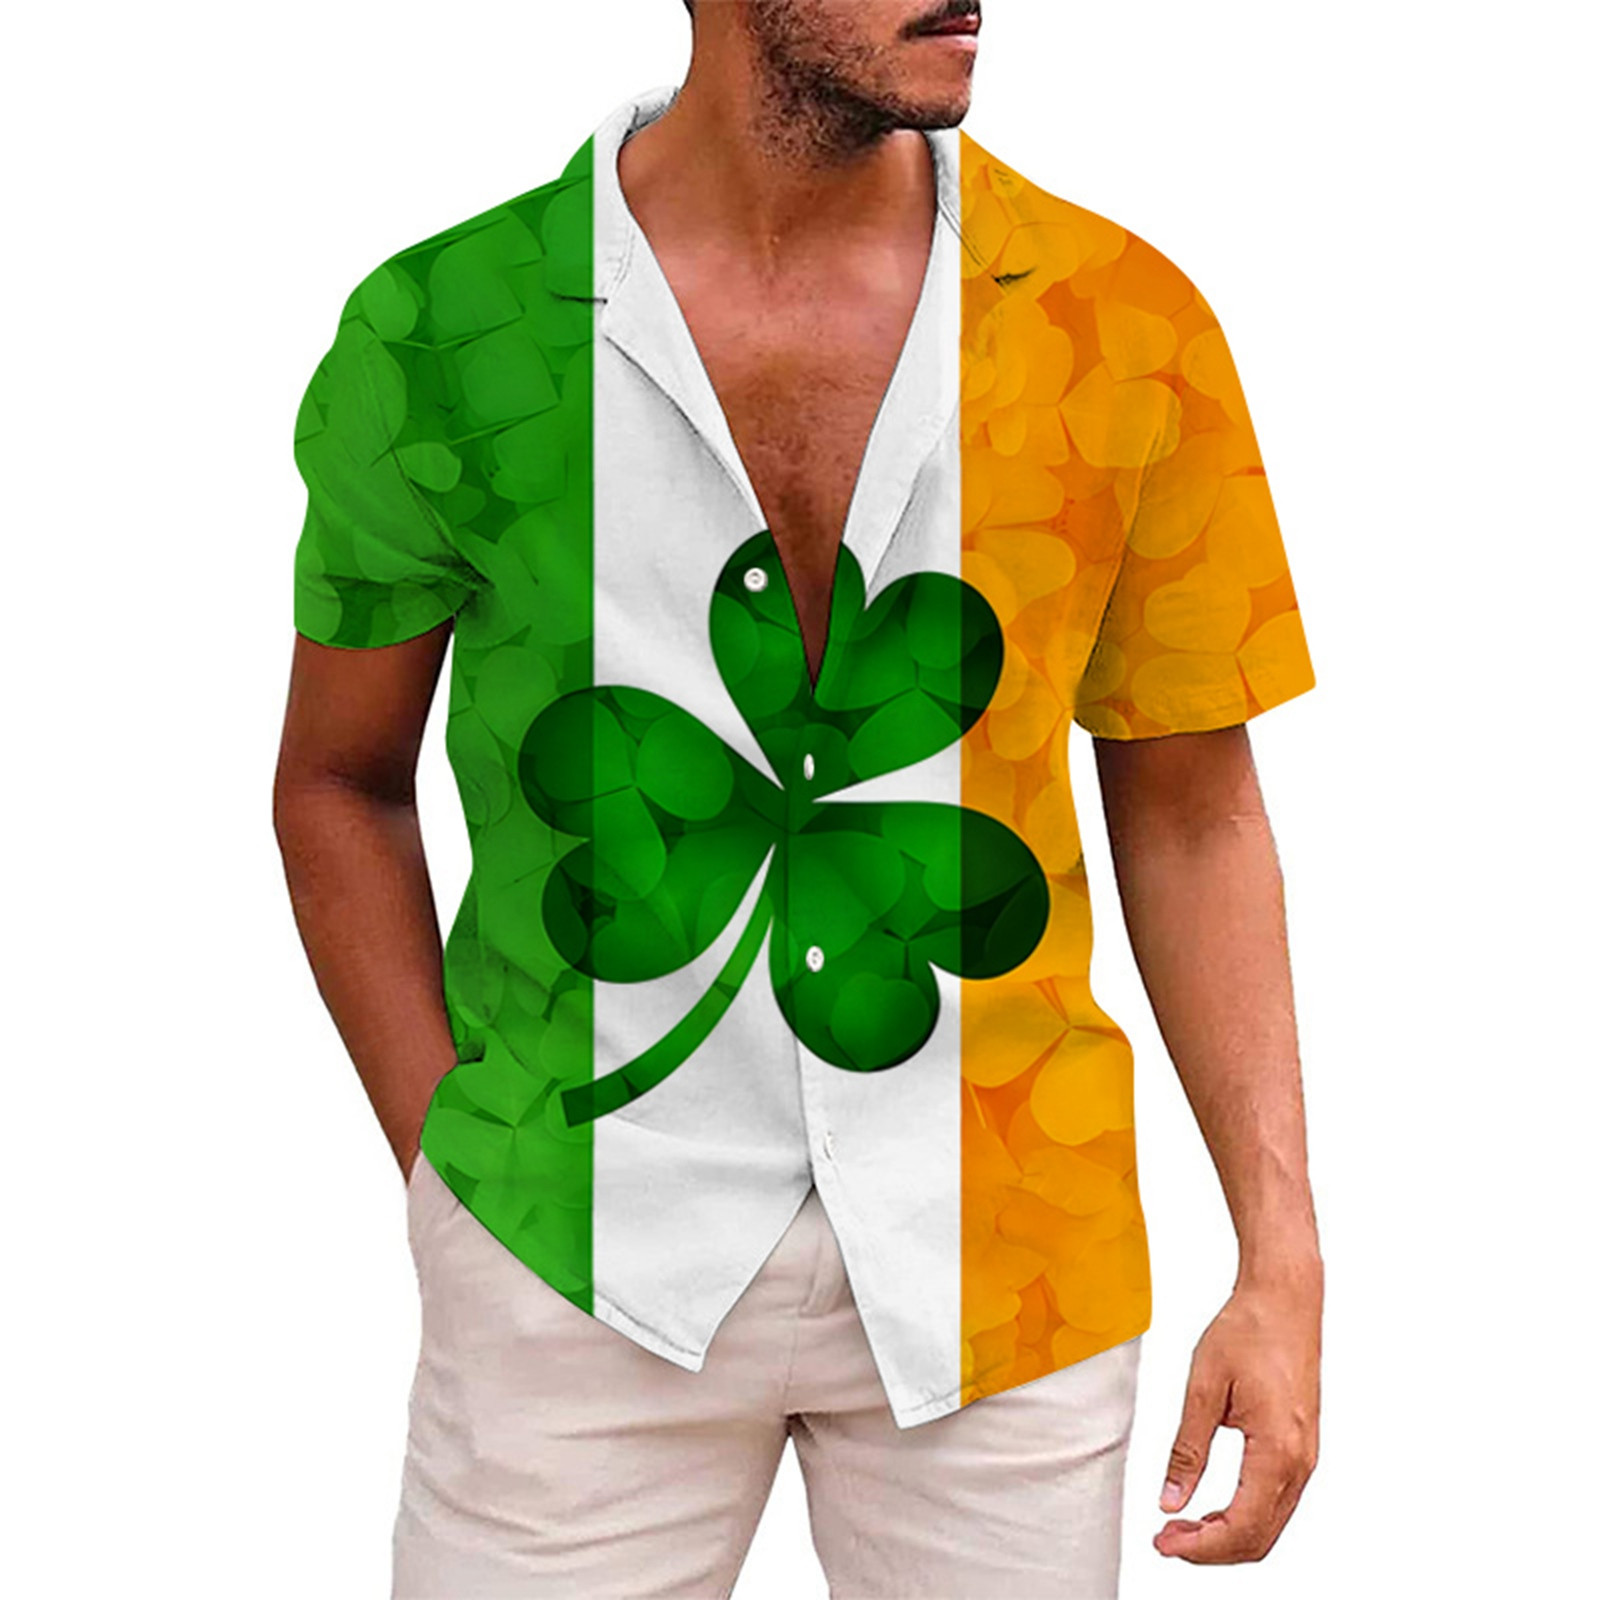 AdBFJAF Long Sleeve Shirts for Men Cotton Thick Male St. Patricks's Day ...